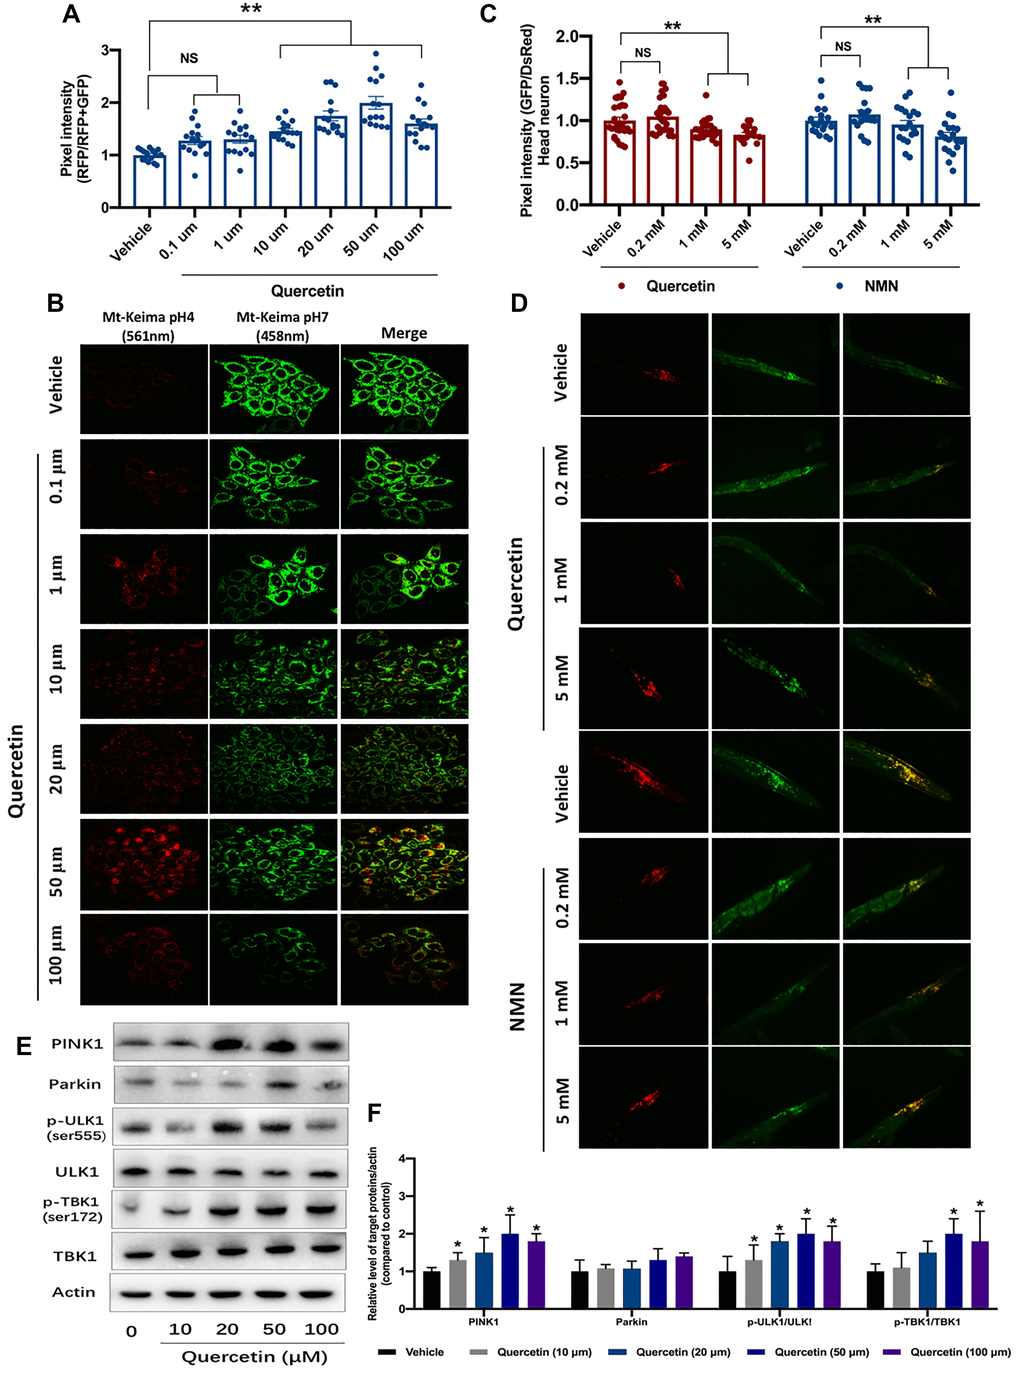 Quercetin induces the mitophagy ability in vitro and in vivo. (A) Evaluation of mitophagy in vehicle- and quercetin (0.1 1, 10, 20, 50 and 100 μM)-treated HeLa cells expressing mt-Keima. Ratios indicating relative levels of mitophagy were quantified. (B) Representative images of (A). (C) Transgenic animals expressing the mt-Rosella biosensor in neuronal cells were treated with quercetin and NMN. Relative levels of neuronal mitophagy are expressed as the ratio between pH-sensitive GFP fluorescence intensity and pH-insensitive DsRed fluorescence intensity (n = 35 nematodes per group). (D) Representative images of (C). (E, F) Changes of designated mitophagy proteins in Hela cells with or without quercetin treatment. Data are expressed as mean ± SEM. *P 